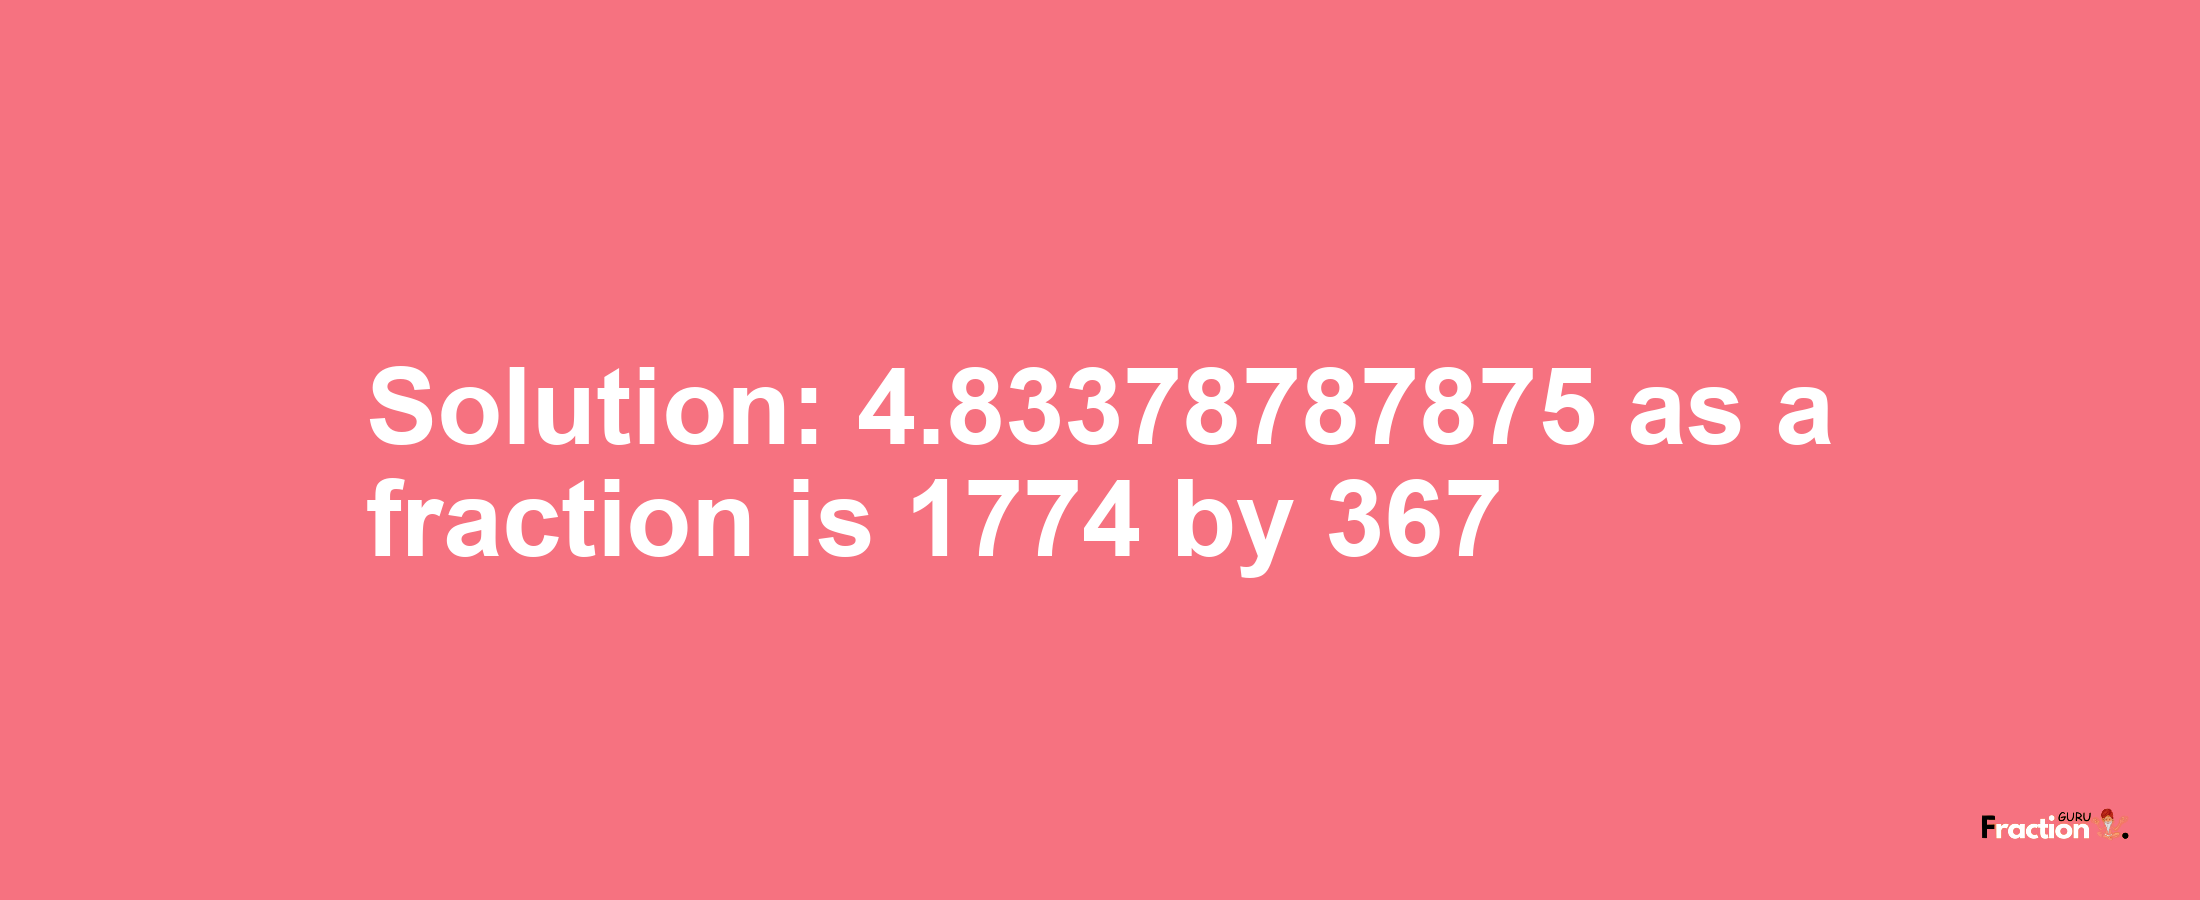 Solution:4.83378787875 as a fraction is 1774/367